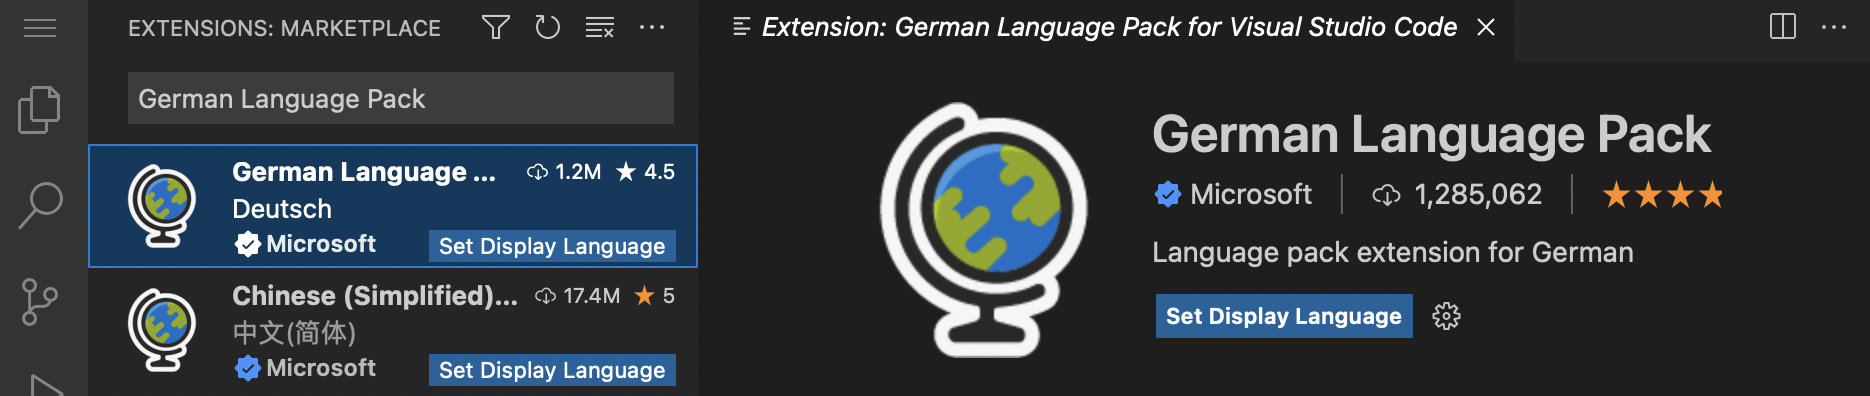 Set Display Language button on a language pack in the Extensions view